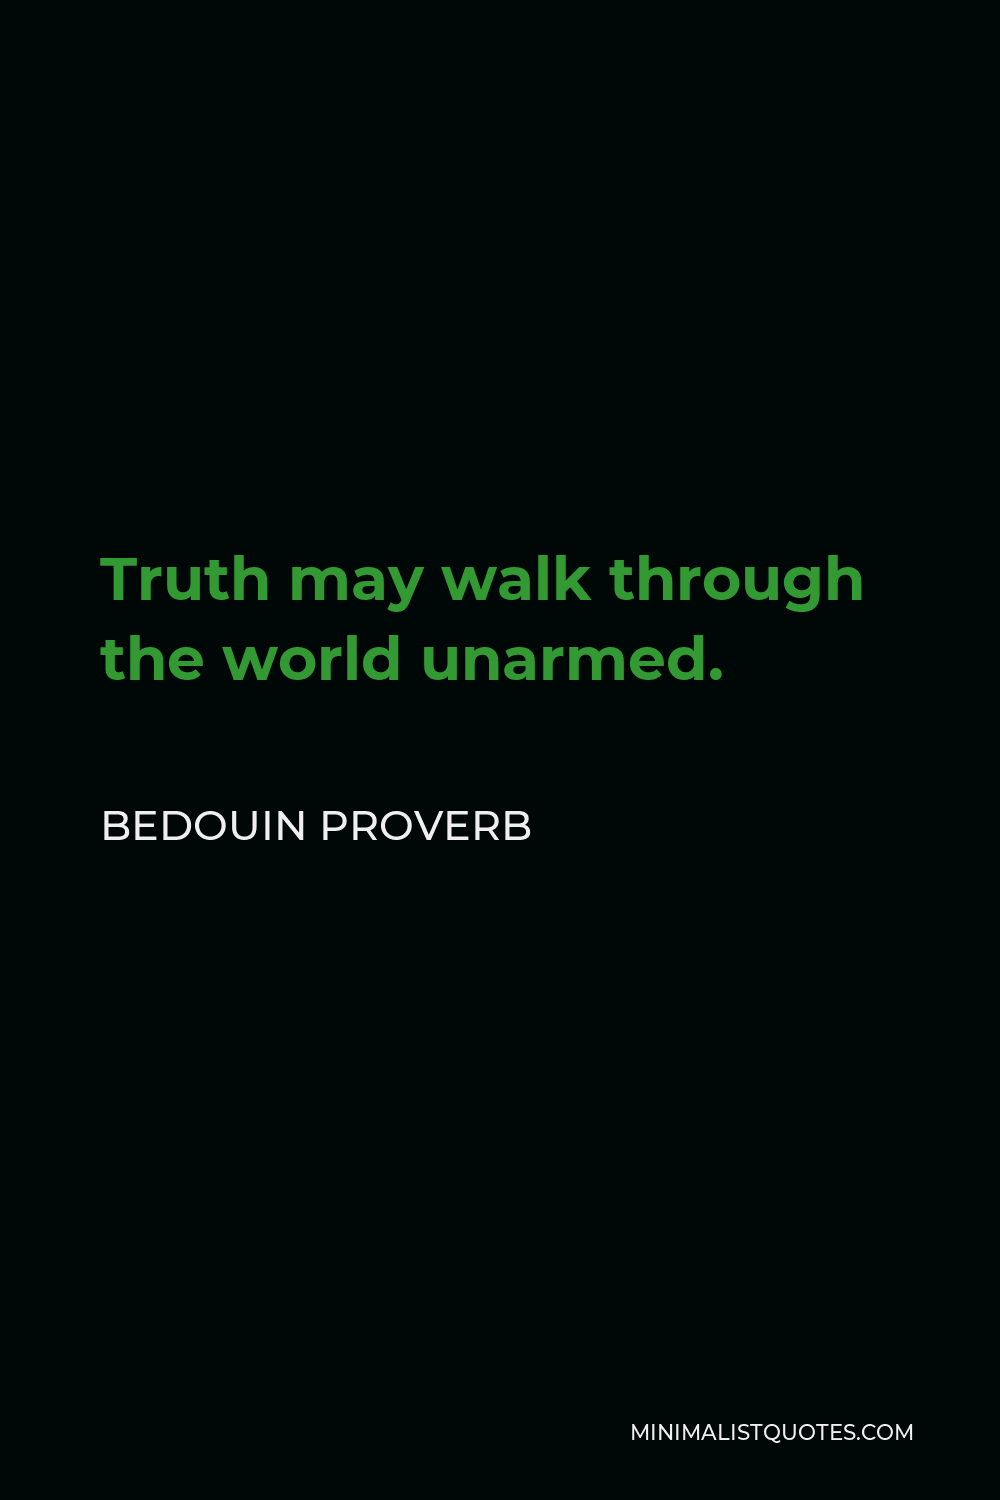 Bedouin Proverb Quote - Truth may walk through the world unarmed.